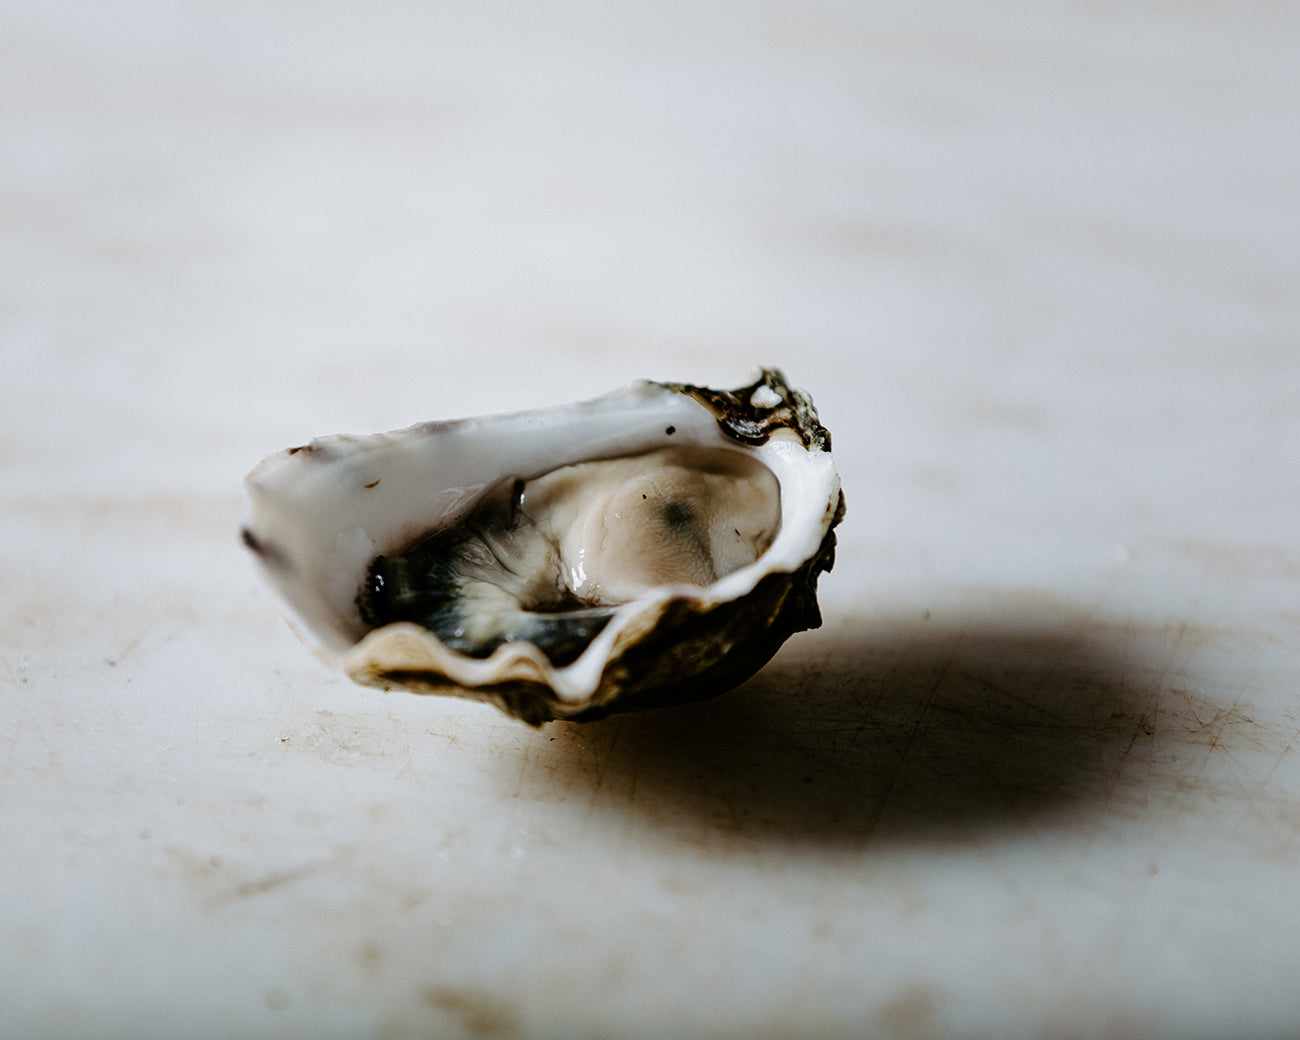 Pacific Oysters, Shucked